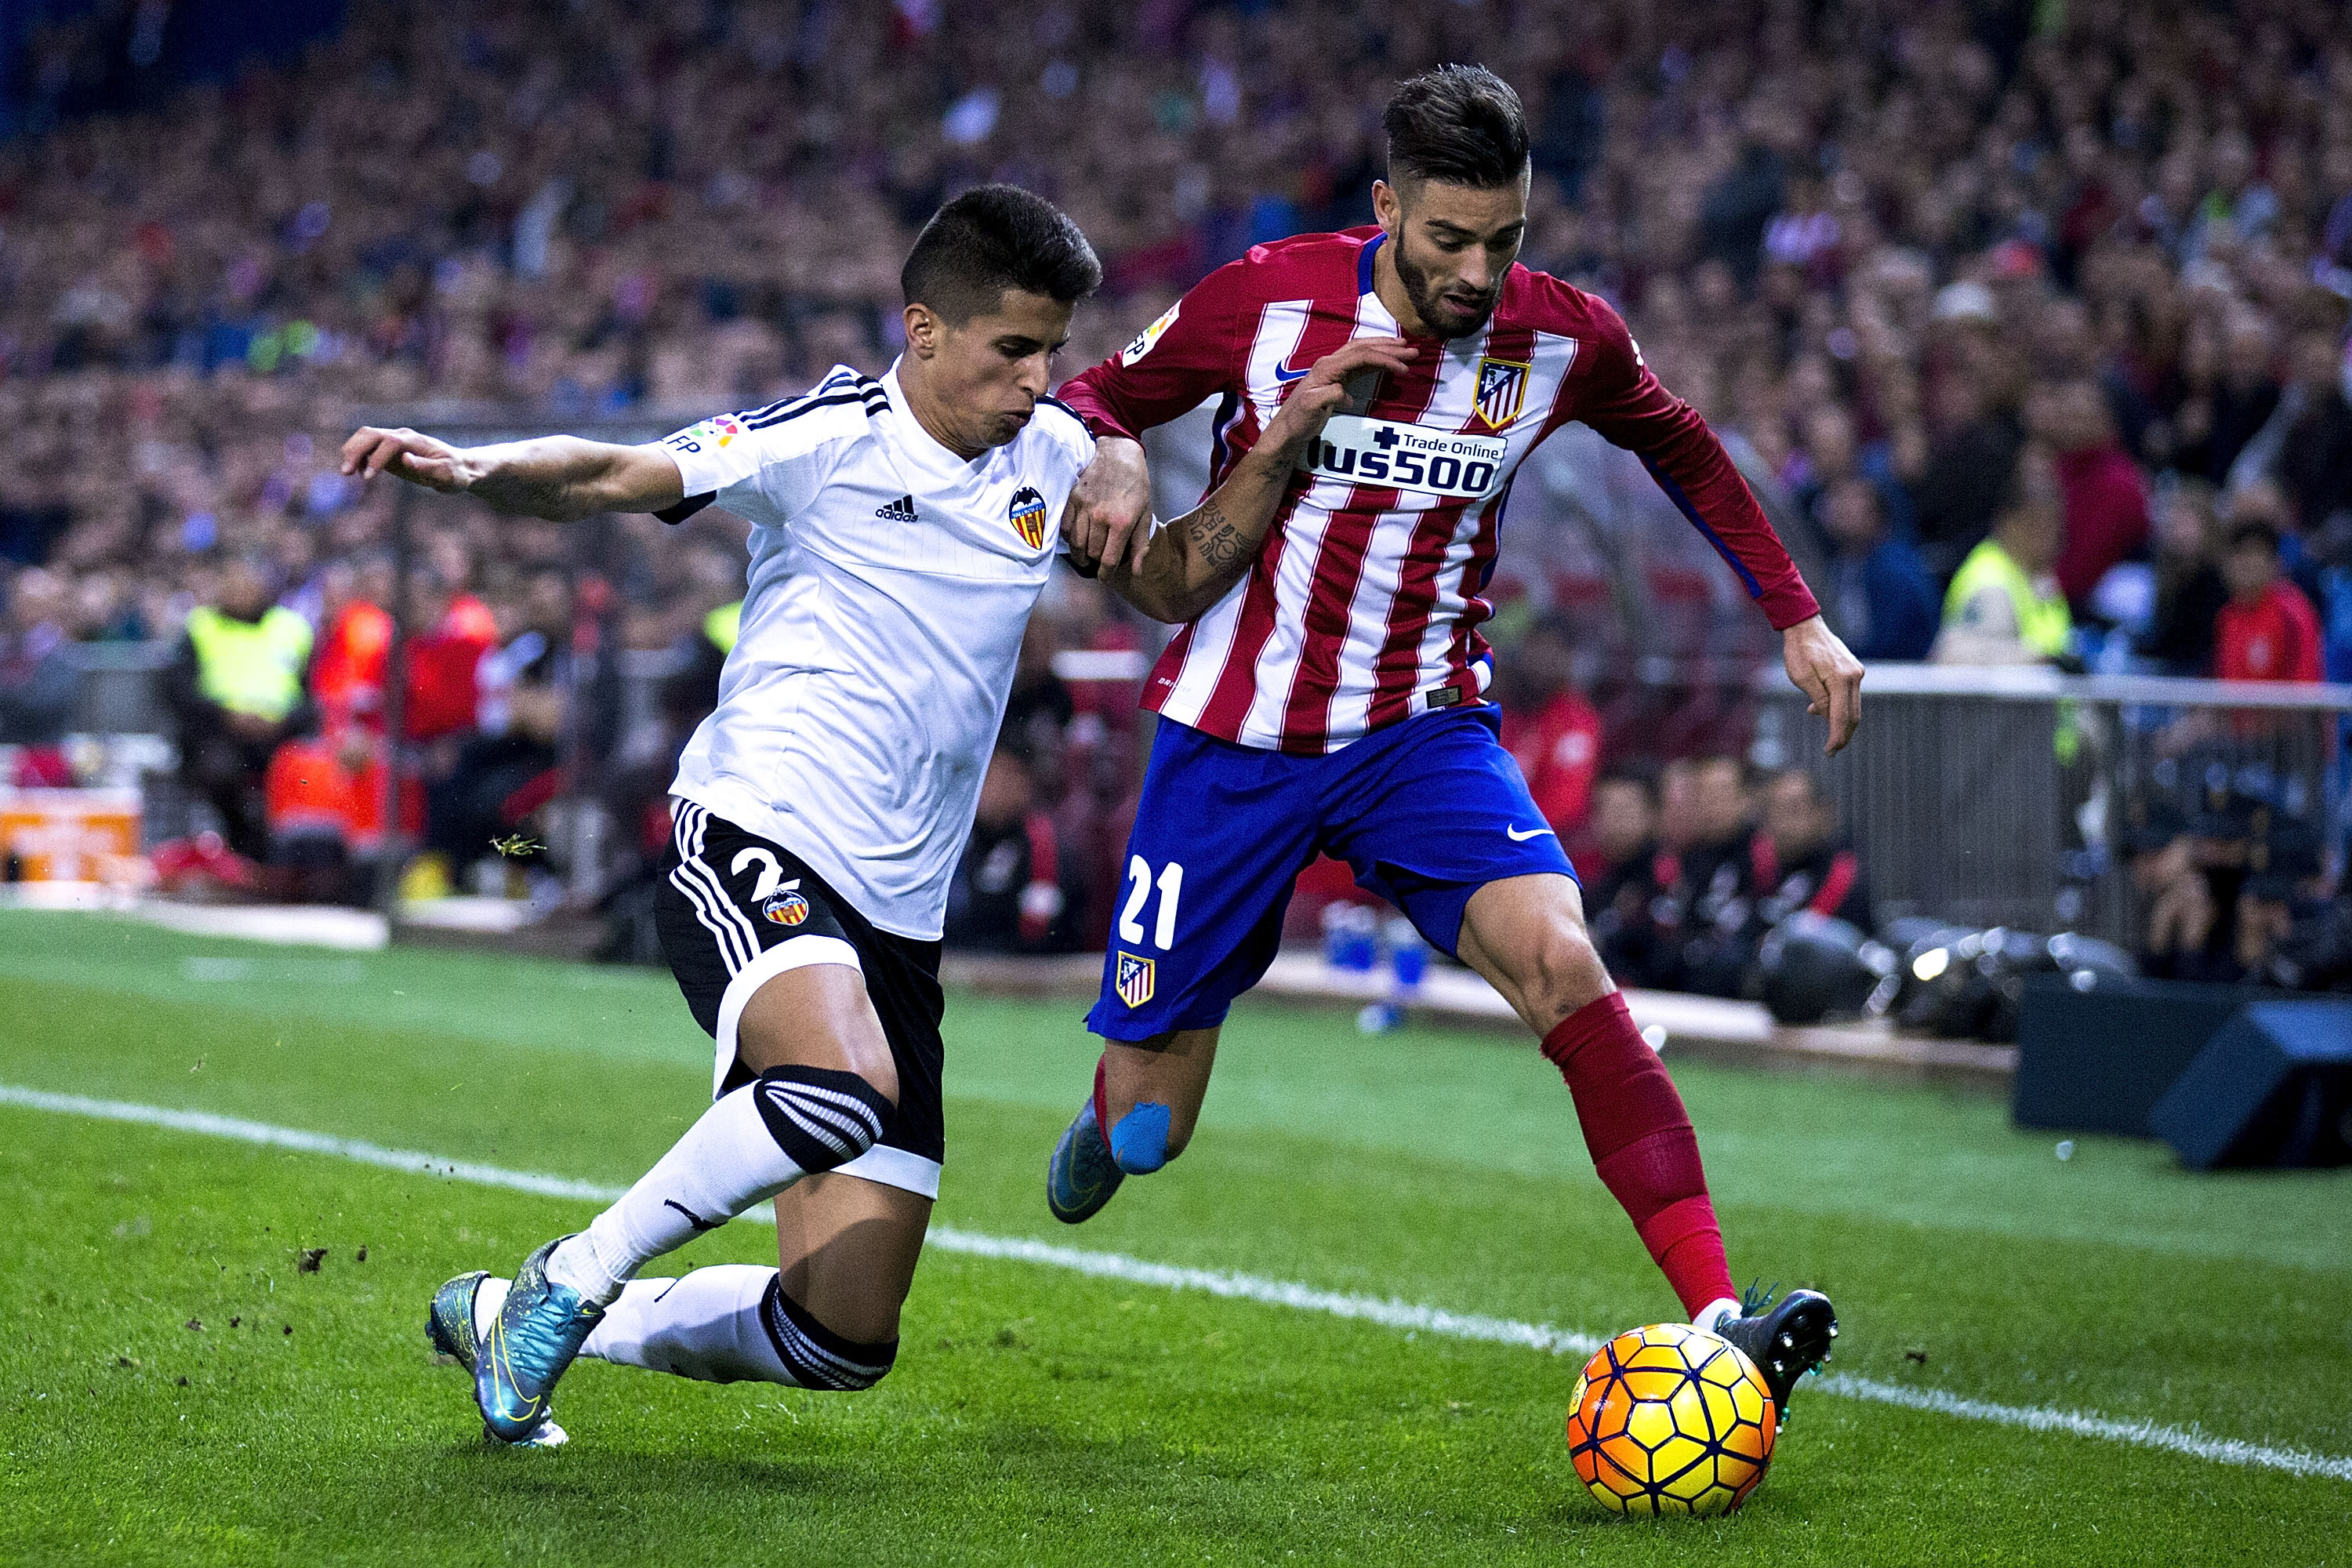 MADRID, SPAIN - OCTOBER 25:  Yannick Carrasco (R) of Atletico de Madrid competes for the ball with Joan Cancelo (L) of Valencia CFduring the La Liga amtch between Club Atletico de Madrid and Valencia CF at Vicente Calderon Stadium on October 25, 2015 in Madrid, Spain.  (Photo by Gonzalo Arroyo Moreno/Getty Images)